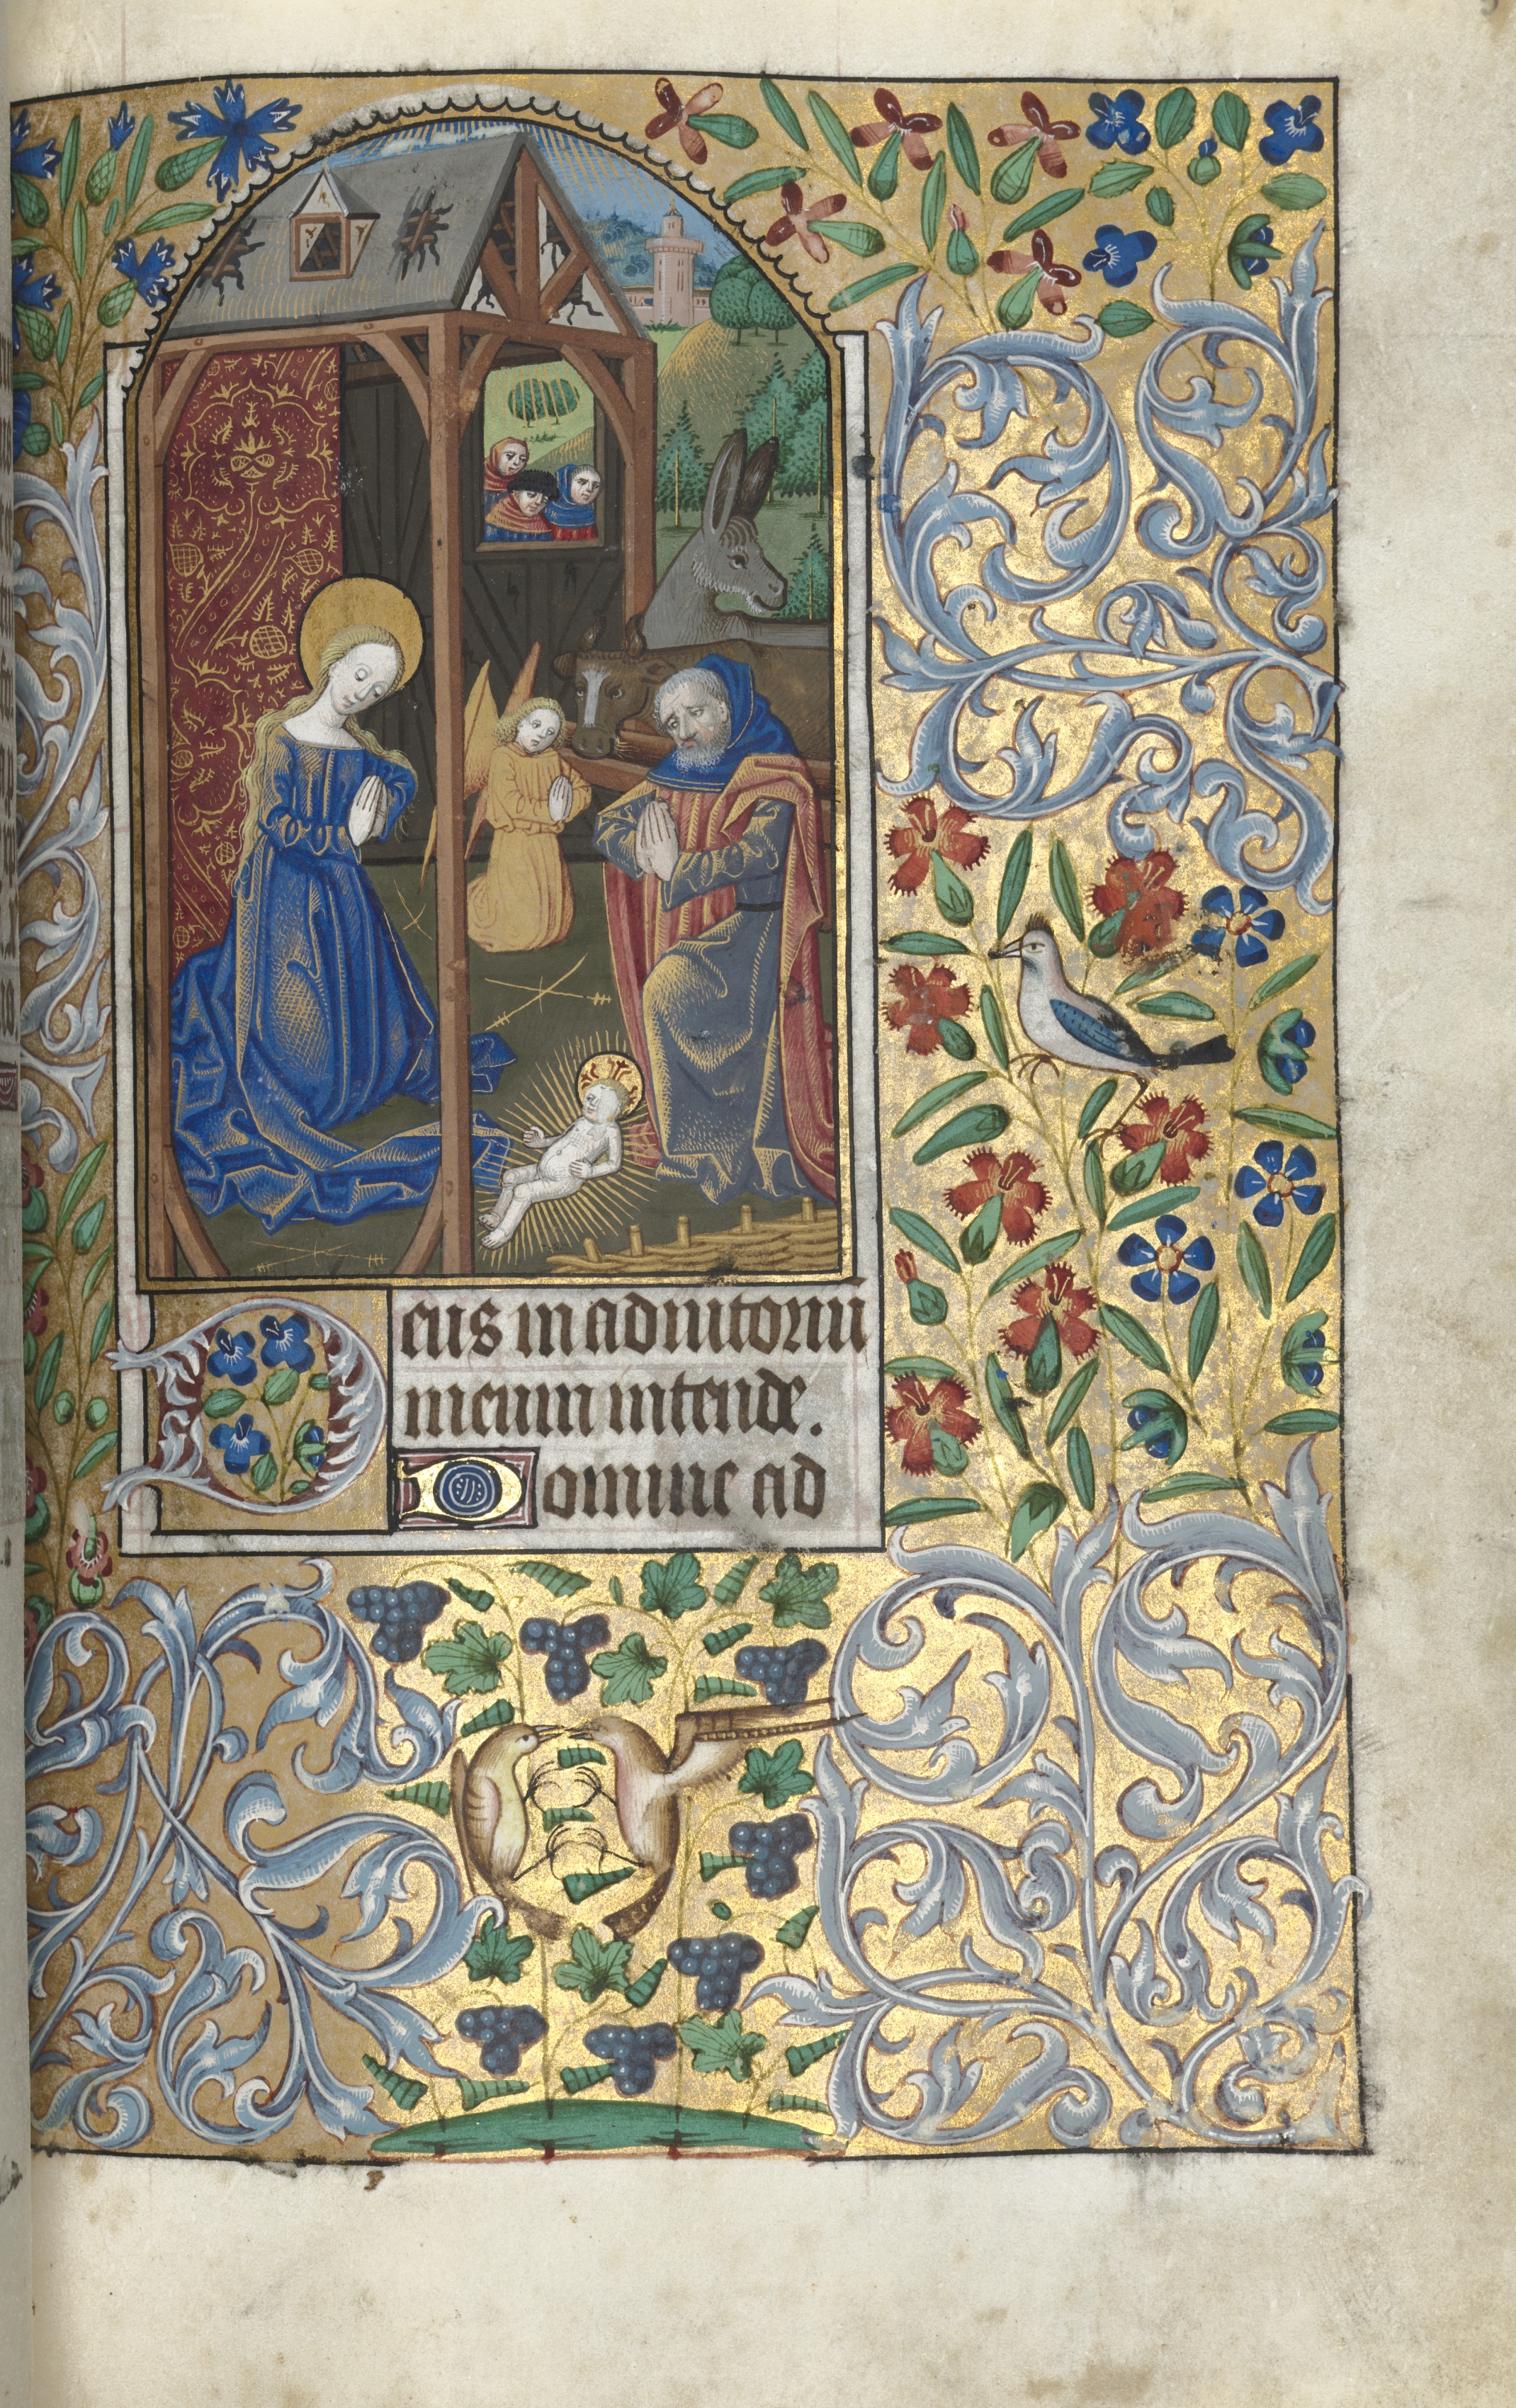 Book of Hours (Use of Rouen): fol. 56r, Adoration with Shepherds/Nativity